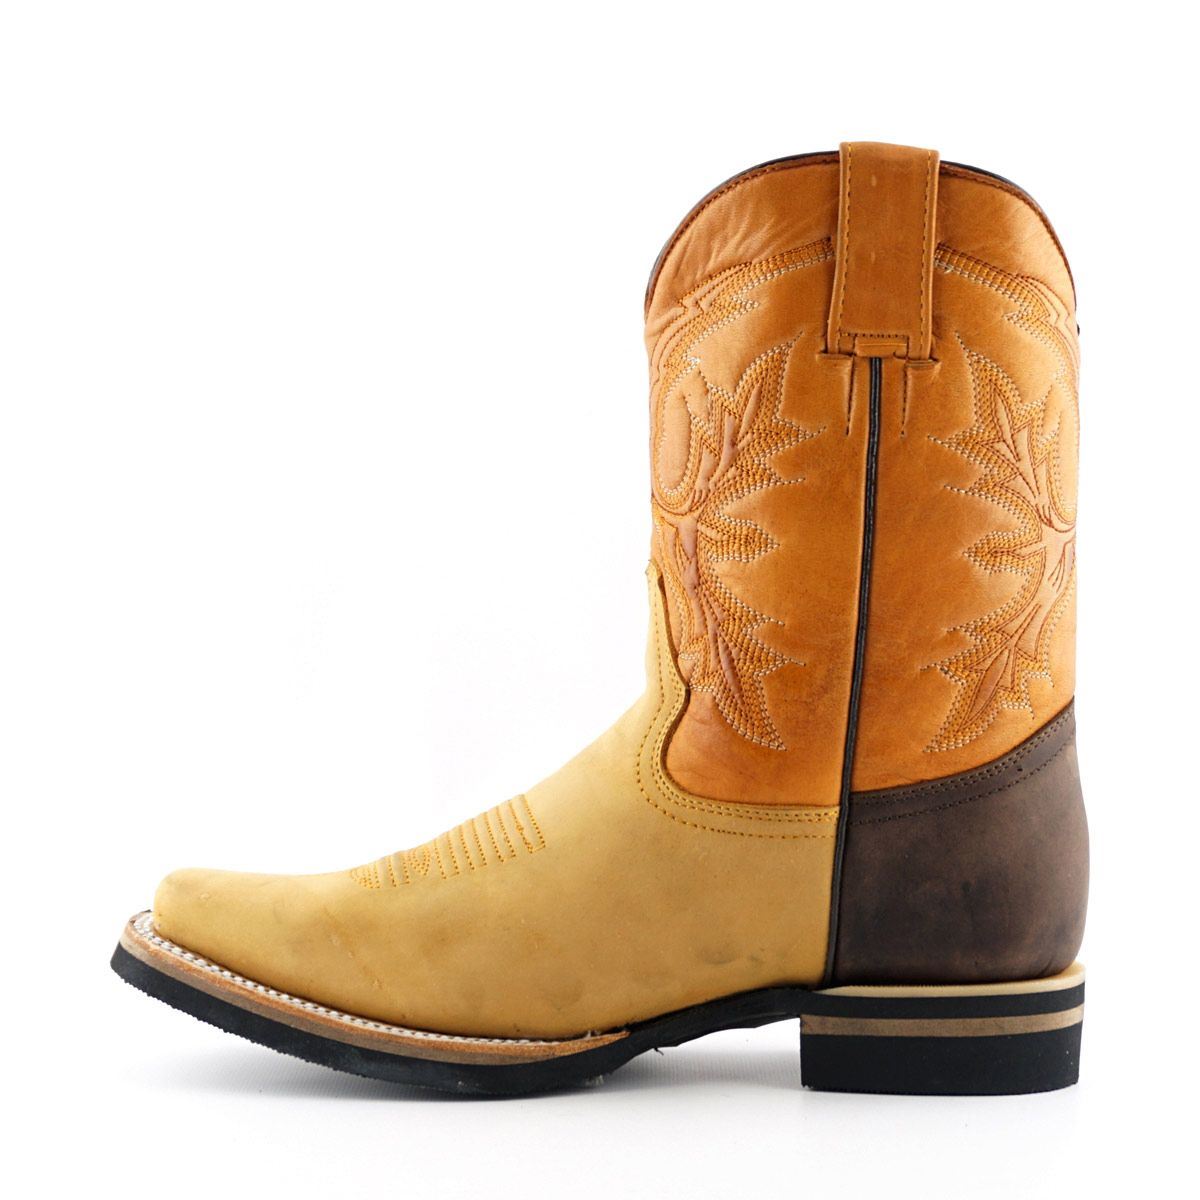 Grinders Tan Mid-Calf Cowboy Leather Boots- El Paso - Upperclass Fashions 